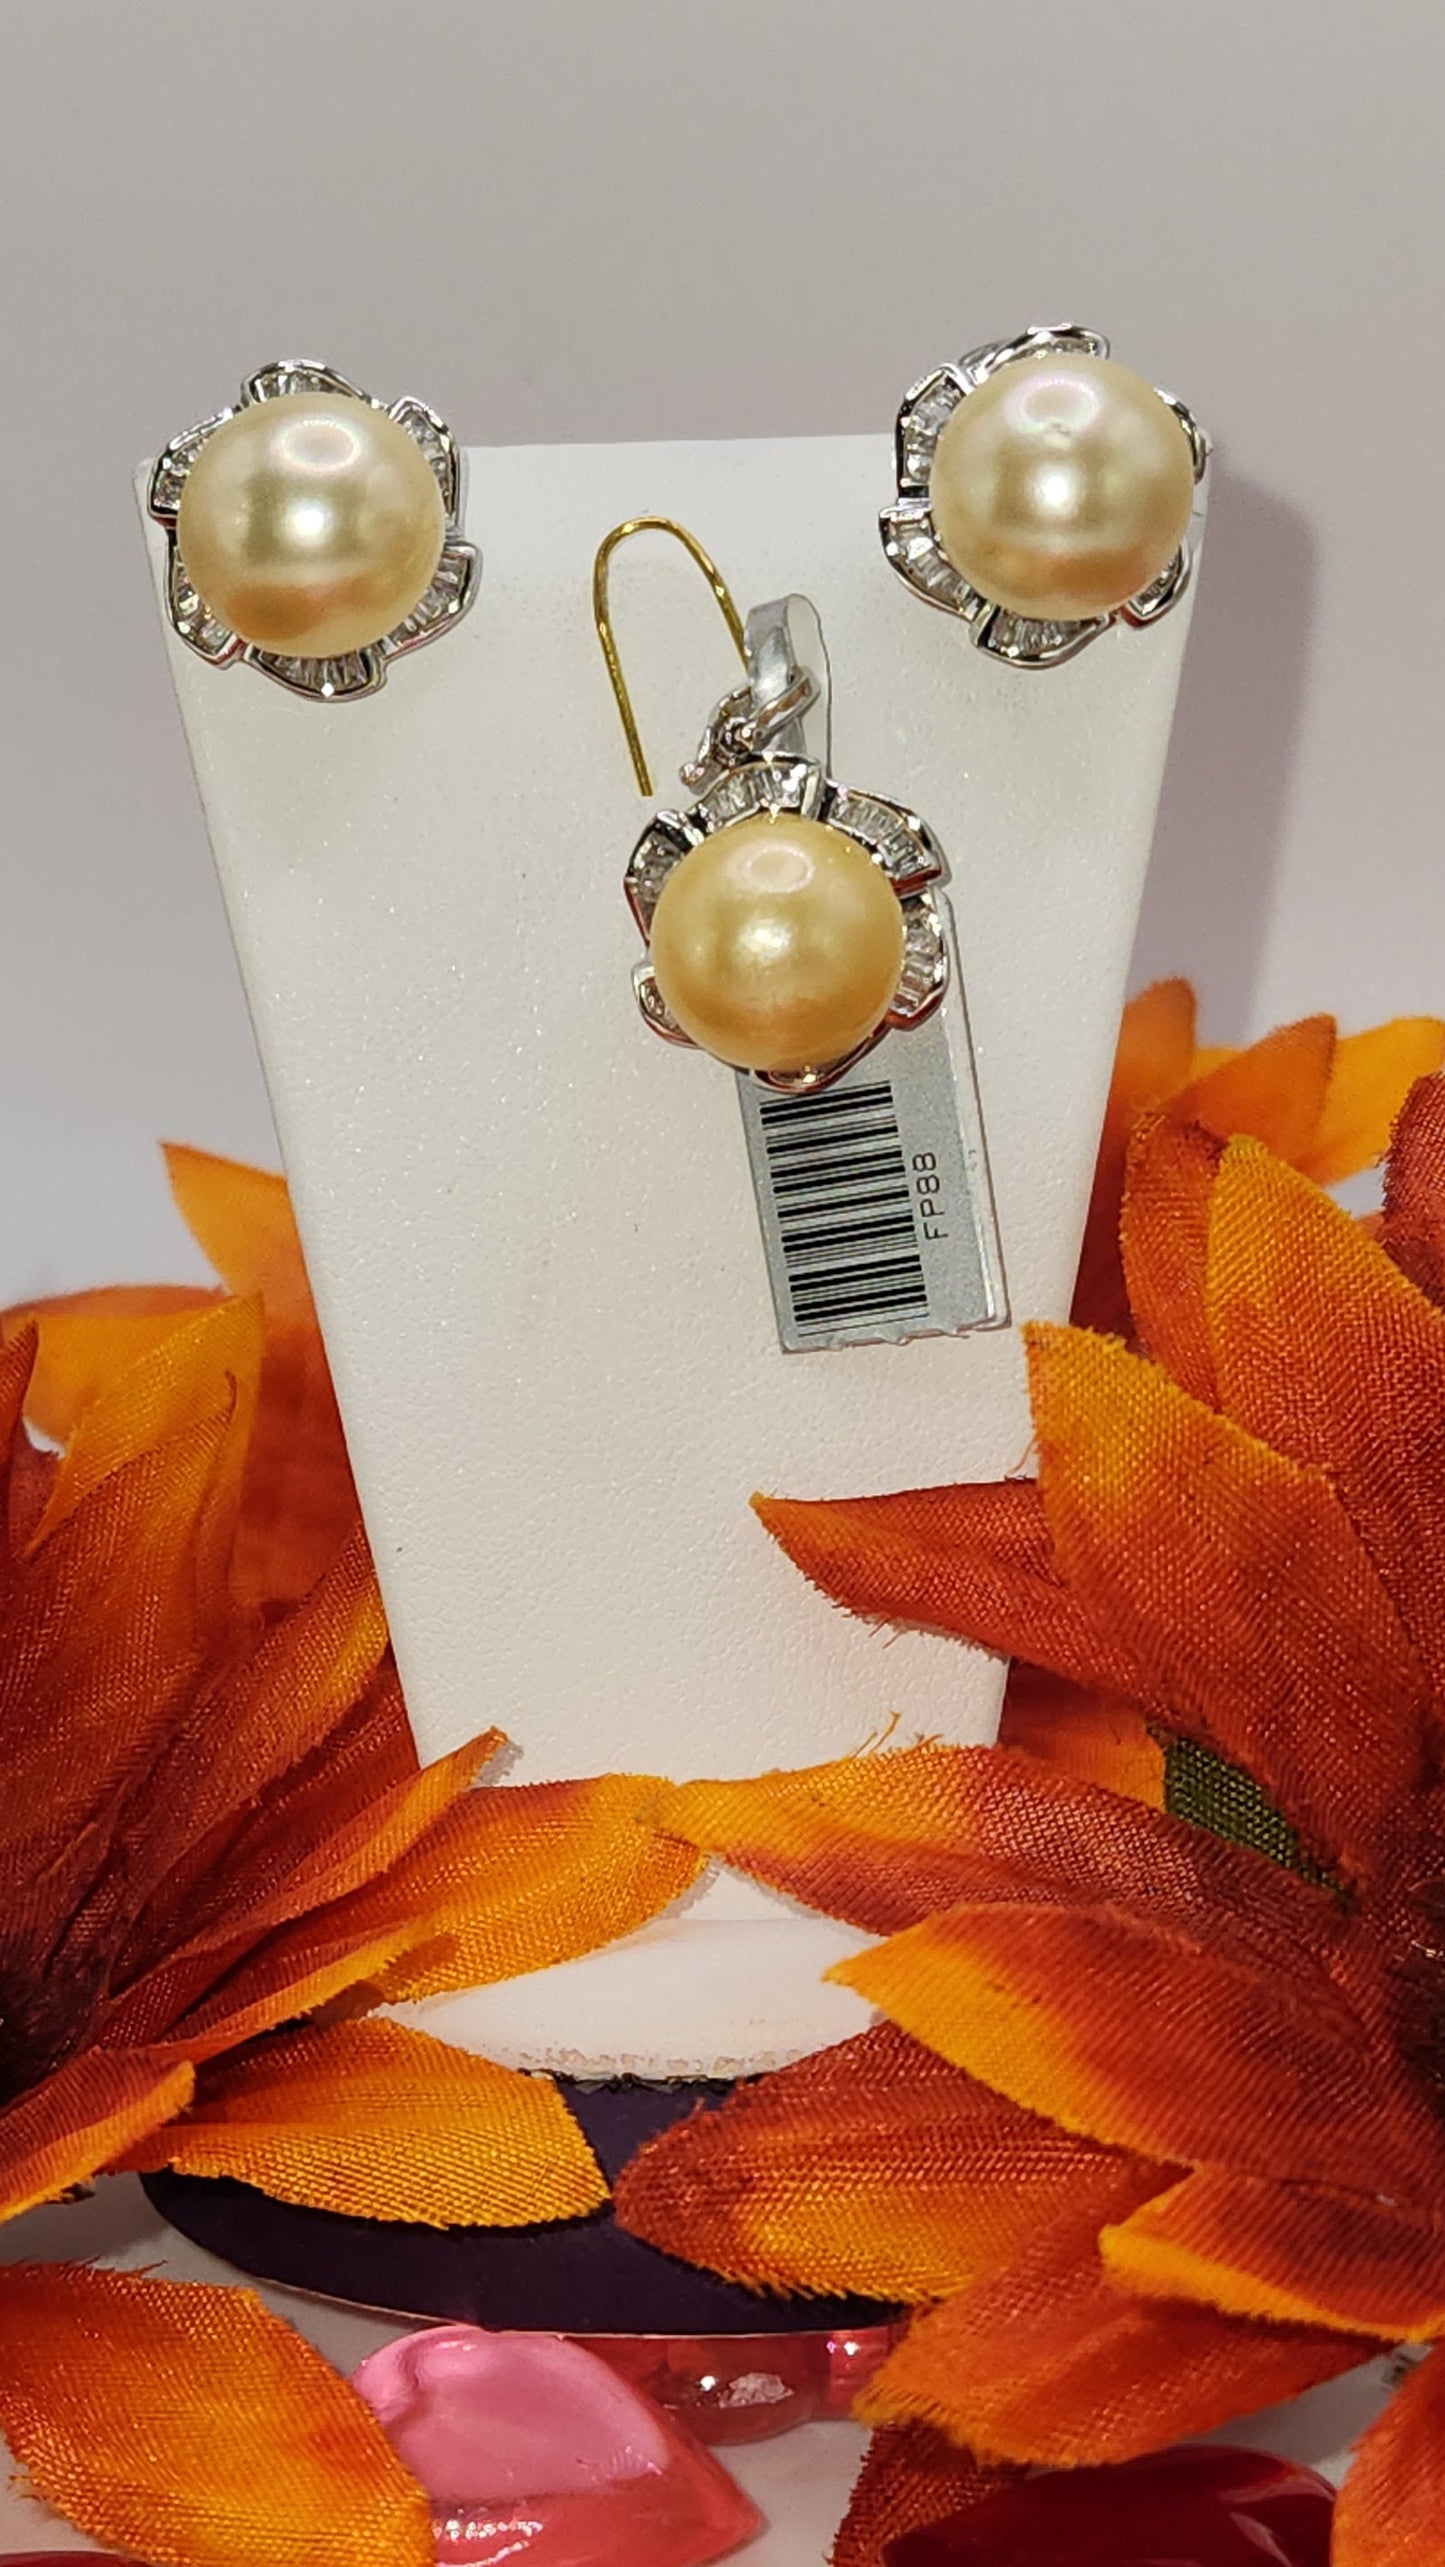 14k White Gold South Sea Pearl Earrings and Pendant